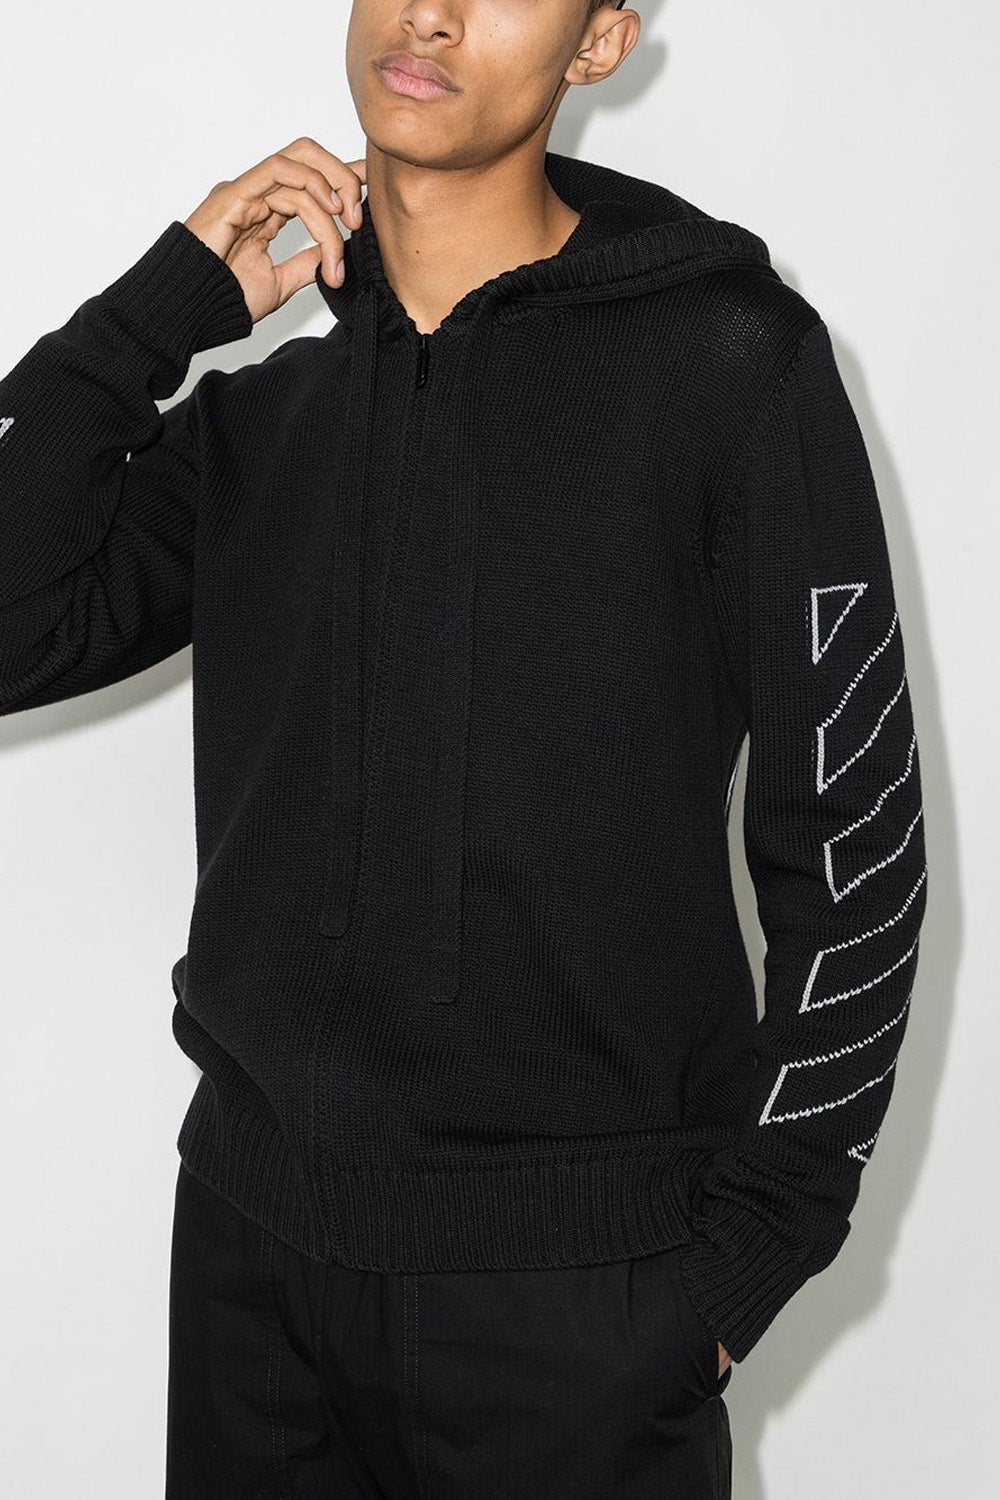 Off-White Diag Outline knitted zip-up hoodie